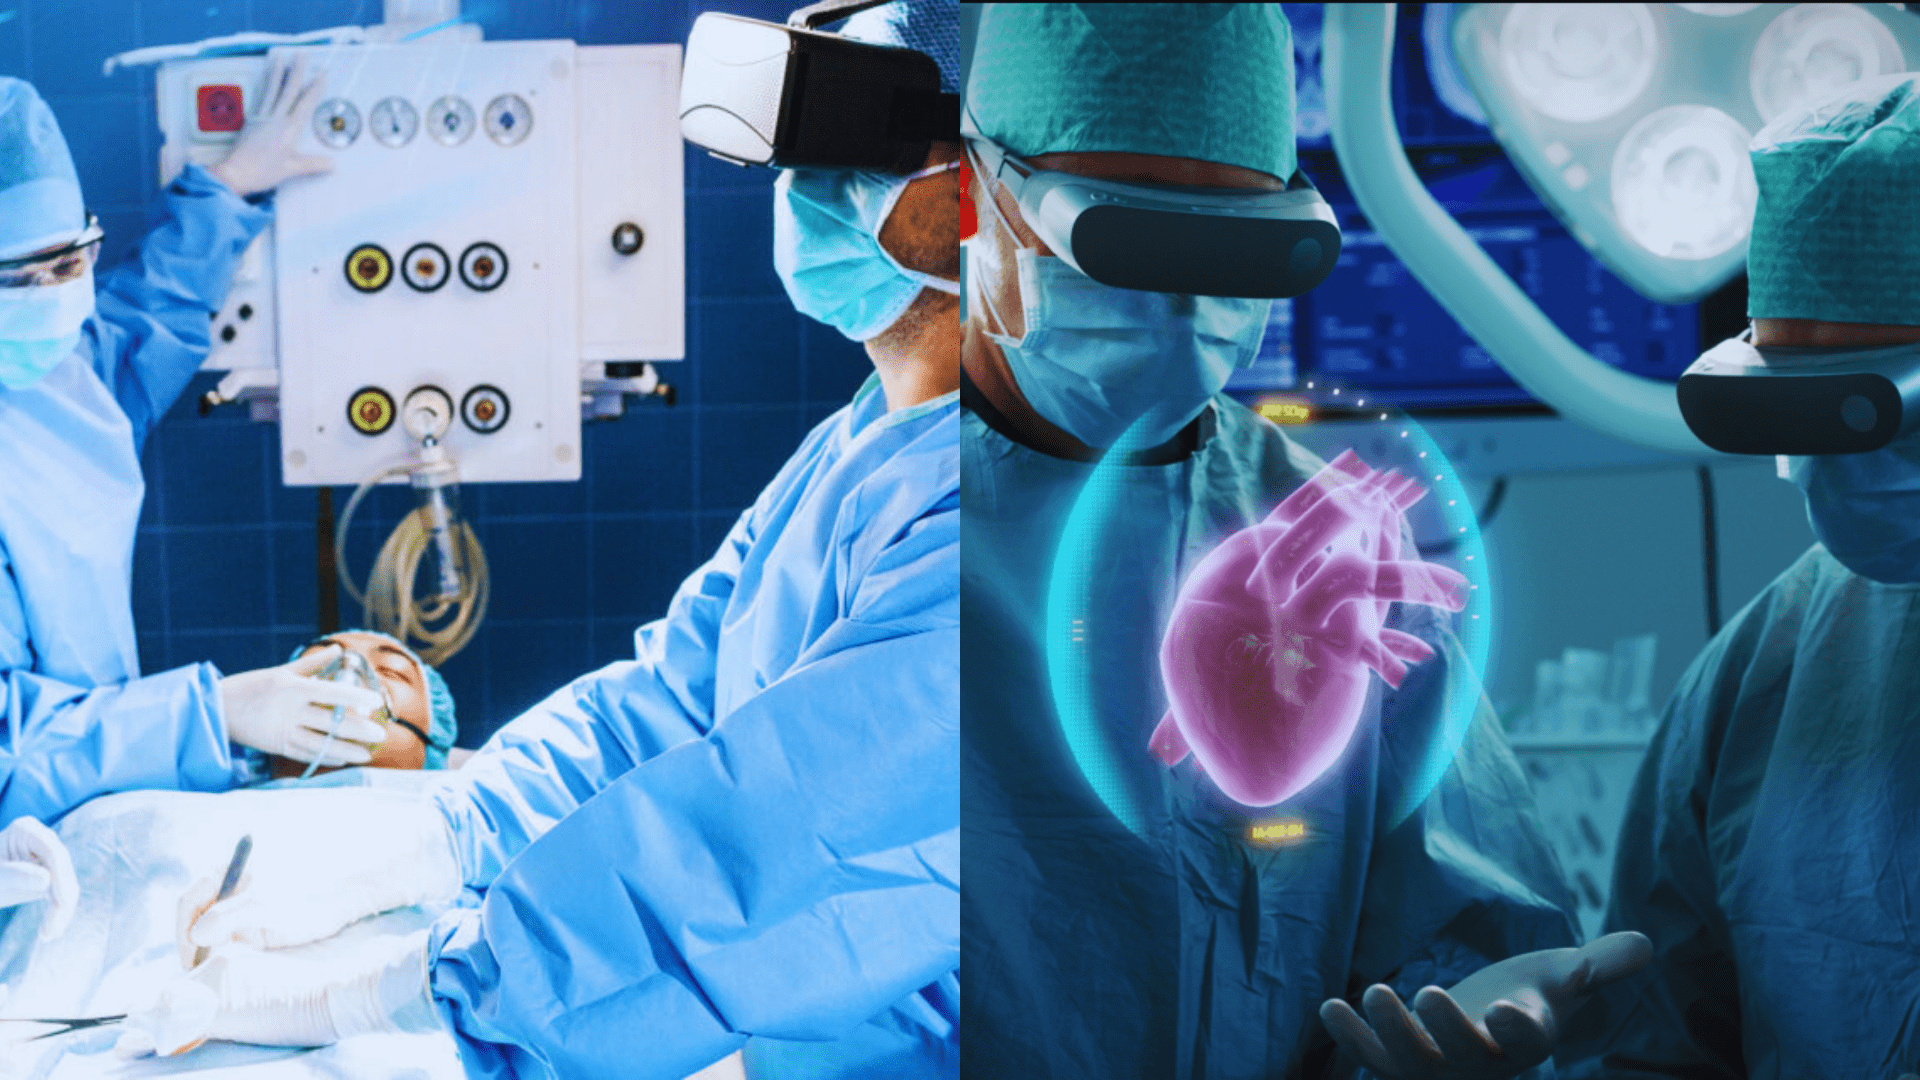 What is a Potential Benefit of Applying Extended Reality Solutions to Surgical Science